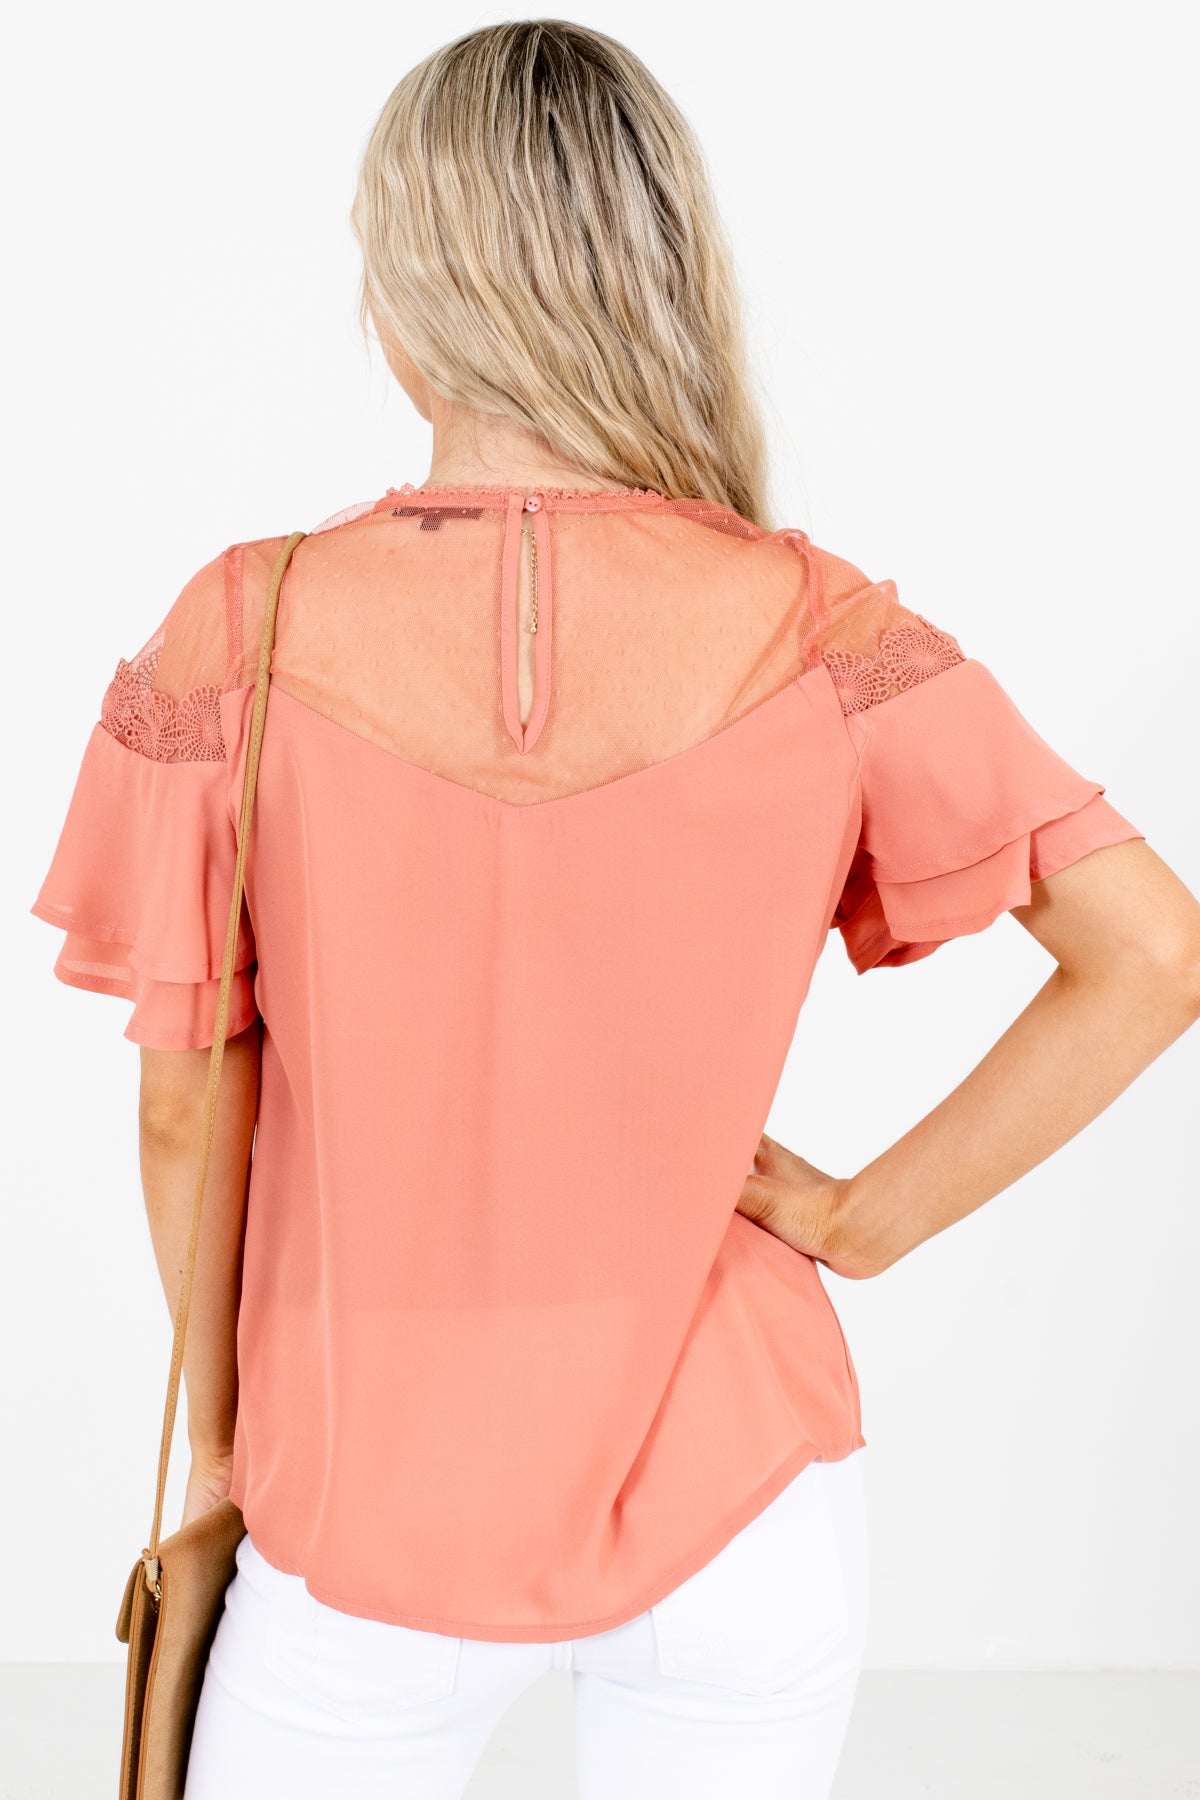 Women's Pink Ruffle Overlay Boutique Blouse